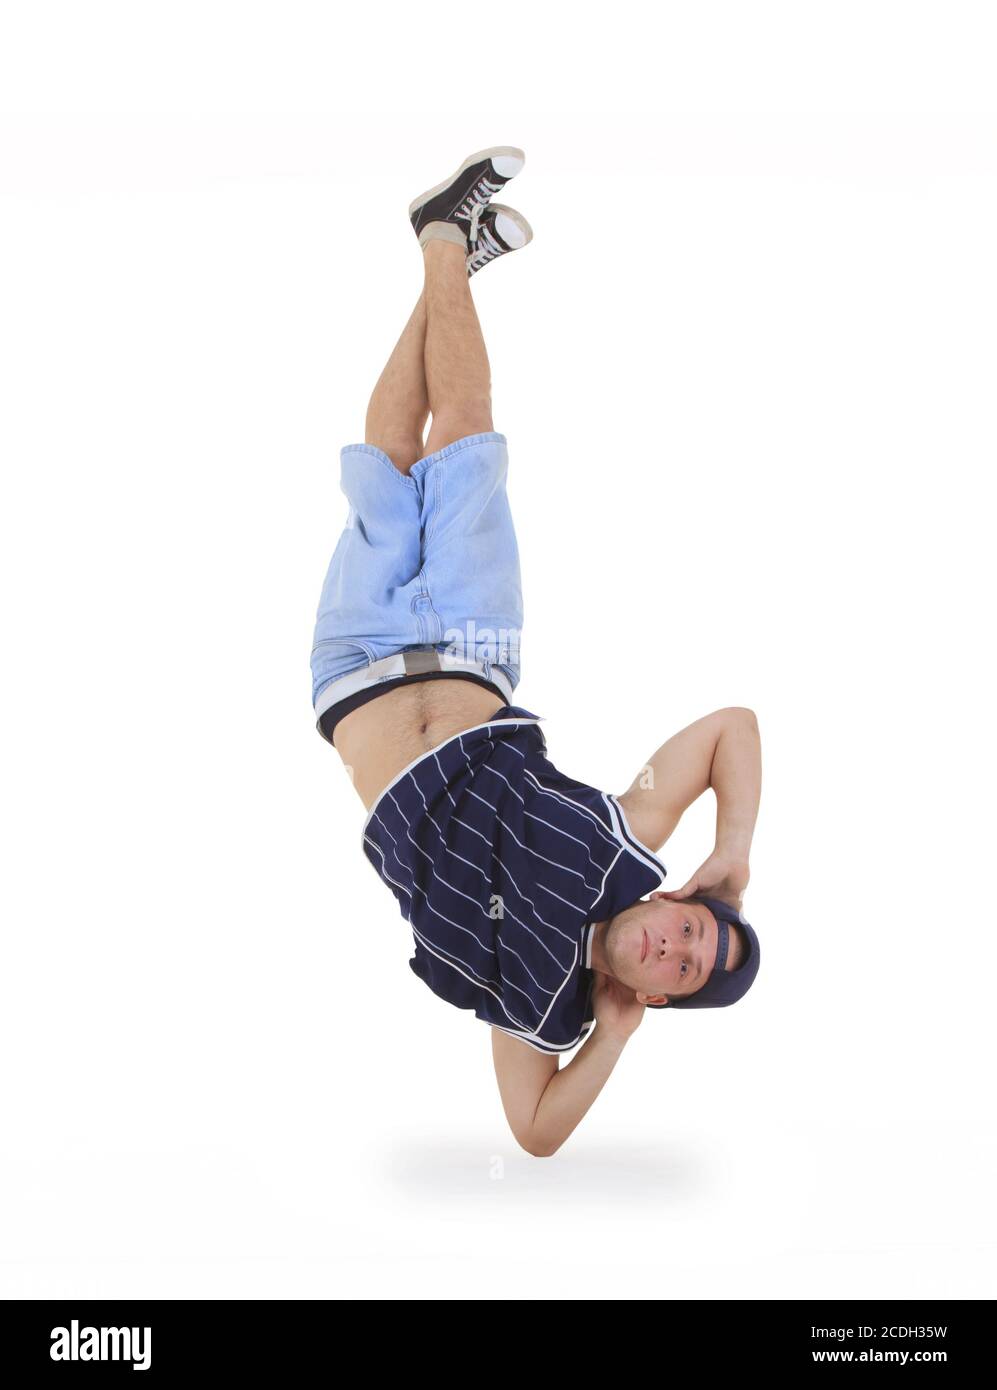 young male dancer performing a bboying stunt Stock Photo